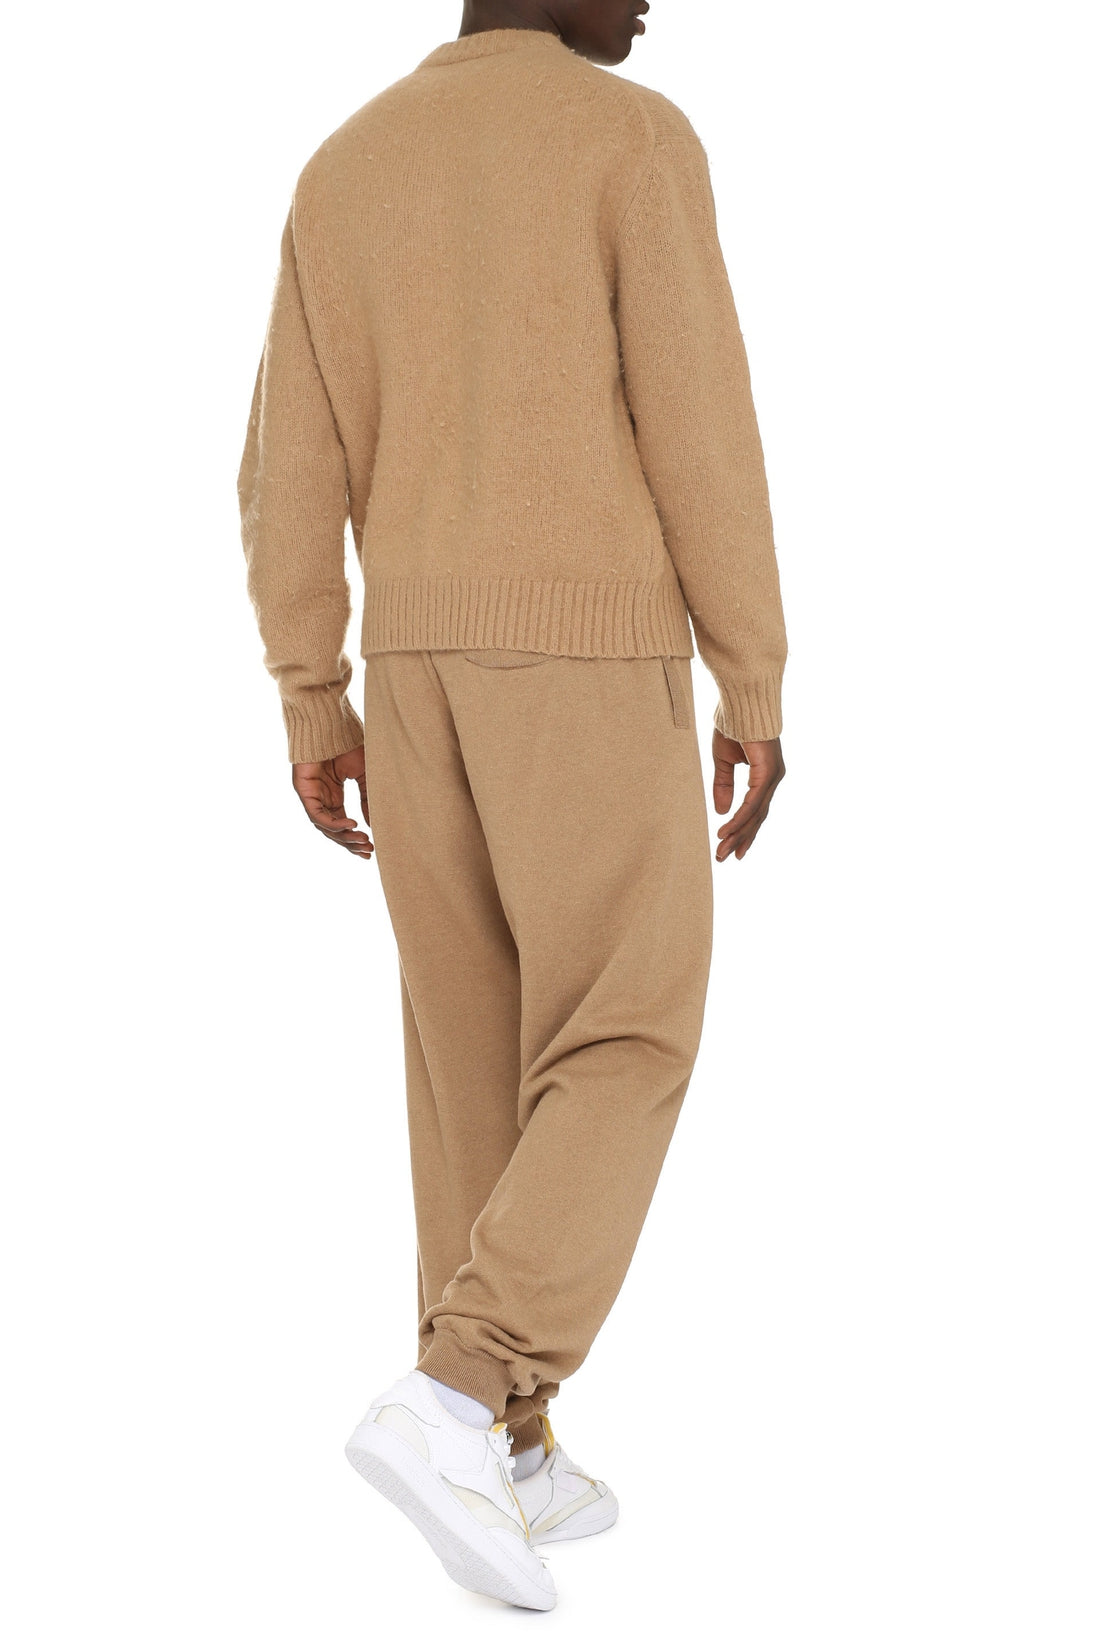 Axel Arigato-OUTLET-SALE-Wool and cashmere blend sweater-ARCHIVIST